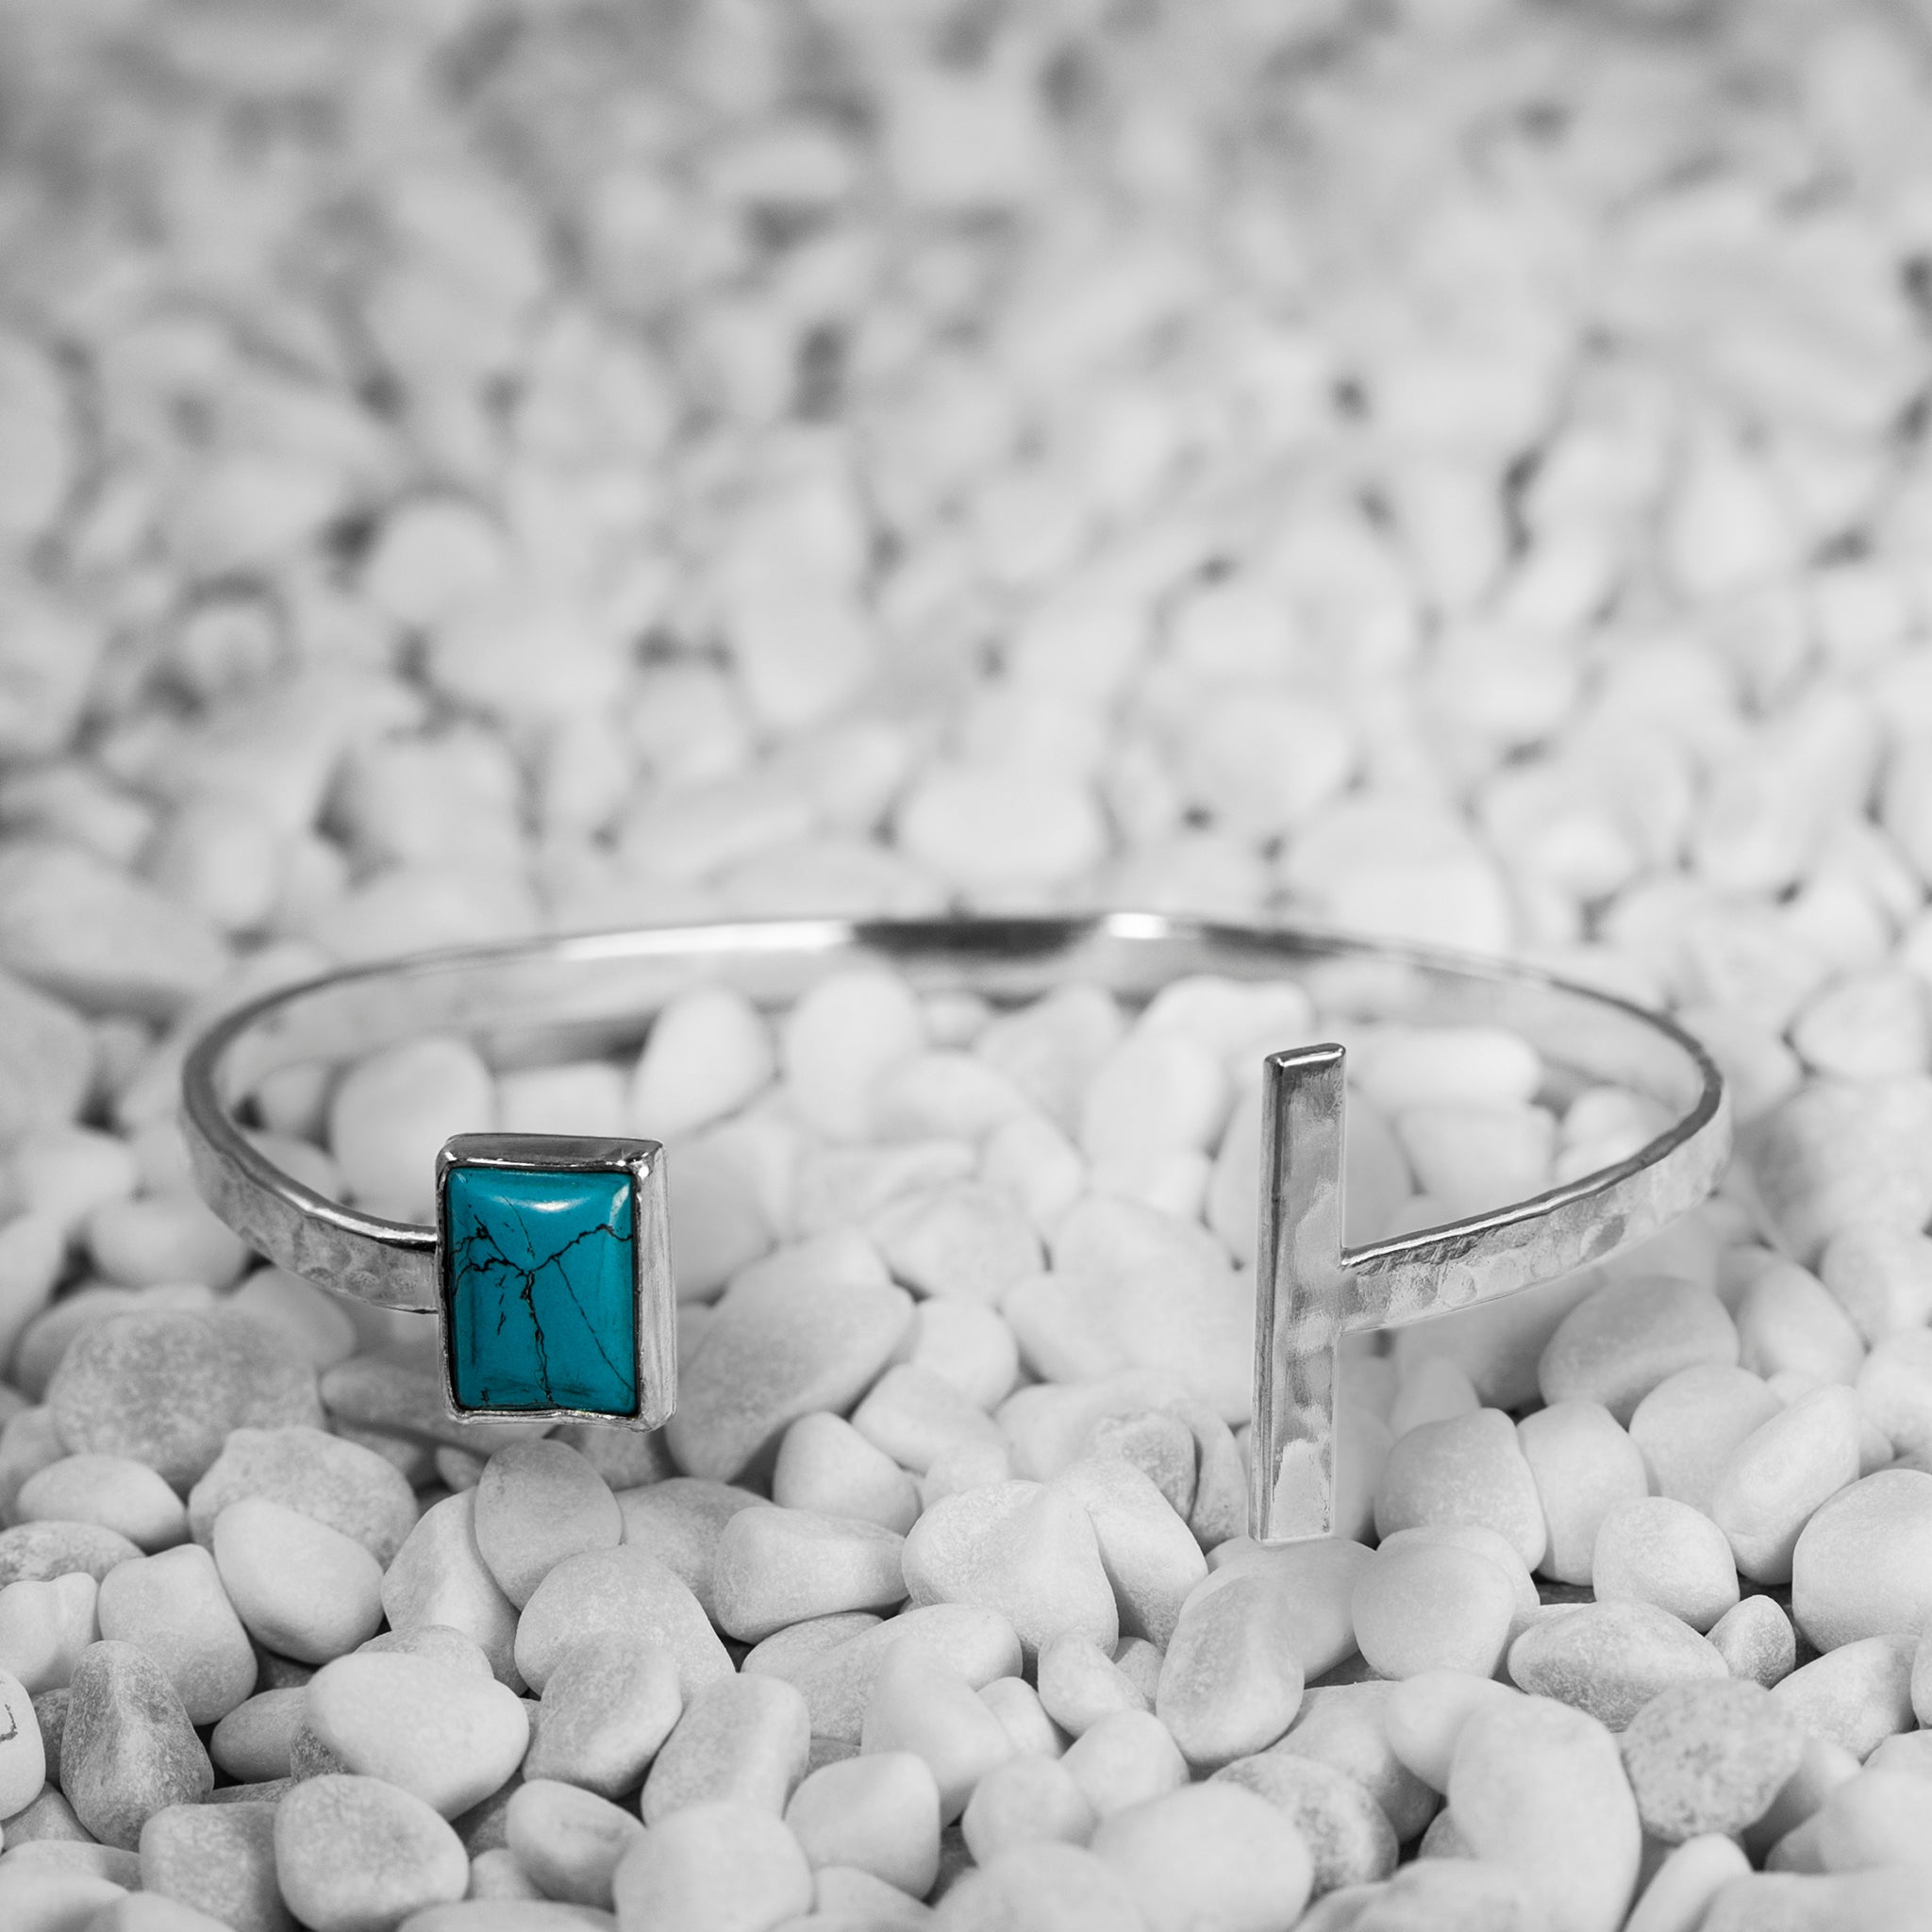 Neptune cuff bracelet in Argentium silver and turquoise by Rouaida.